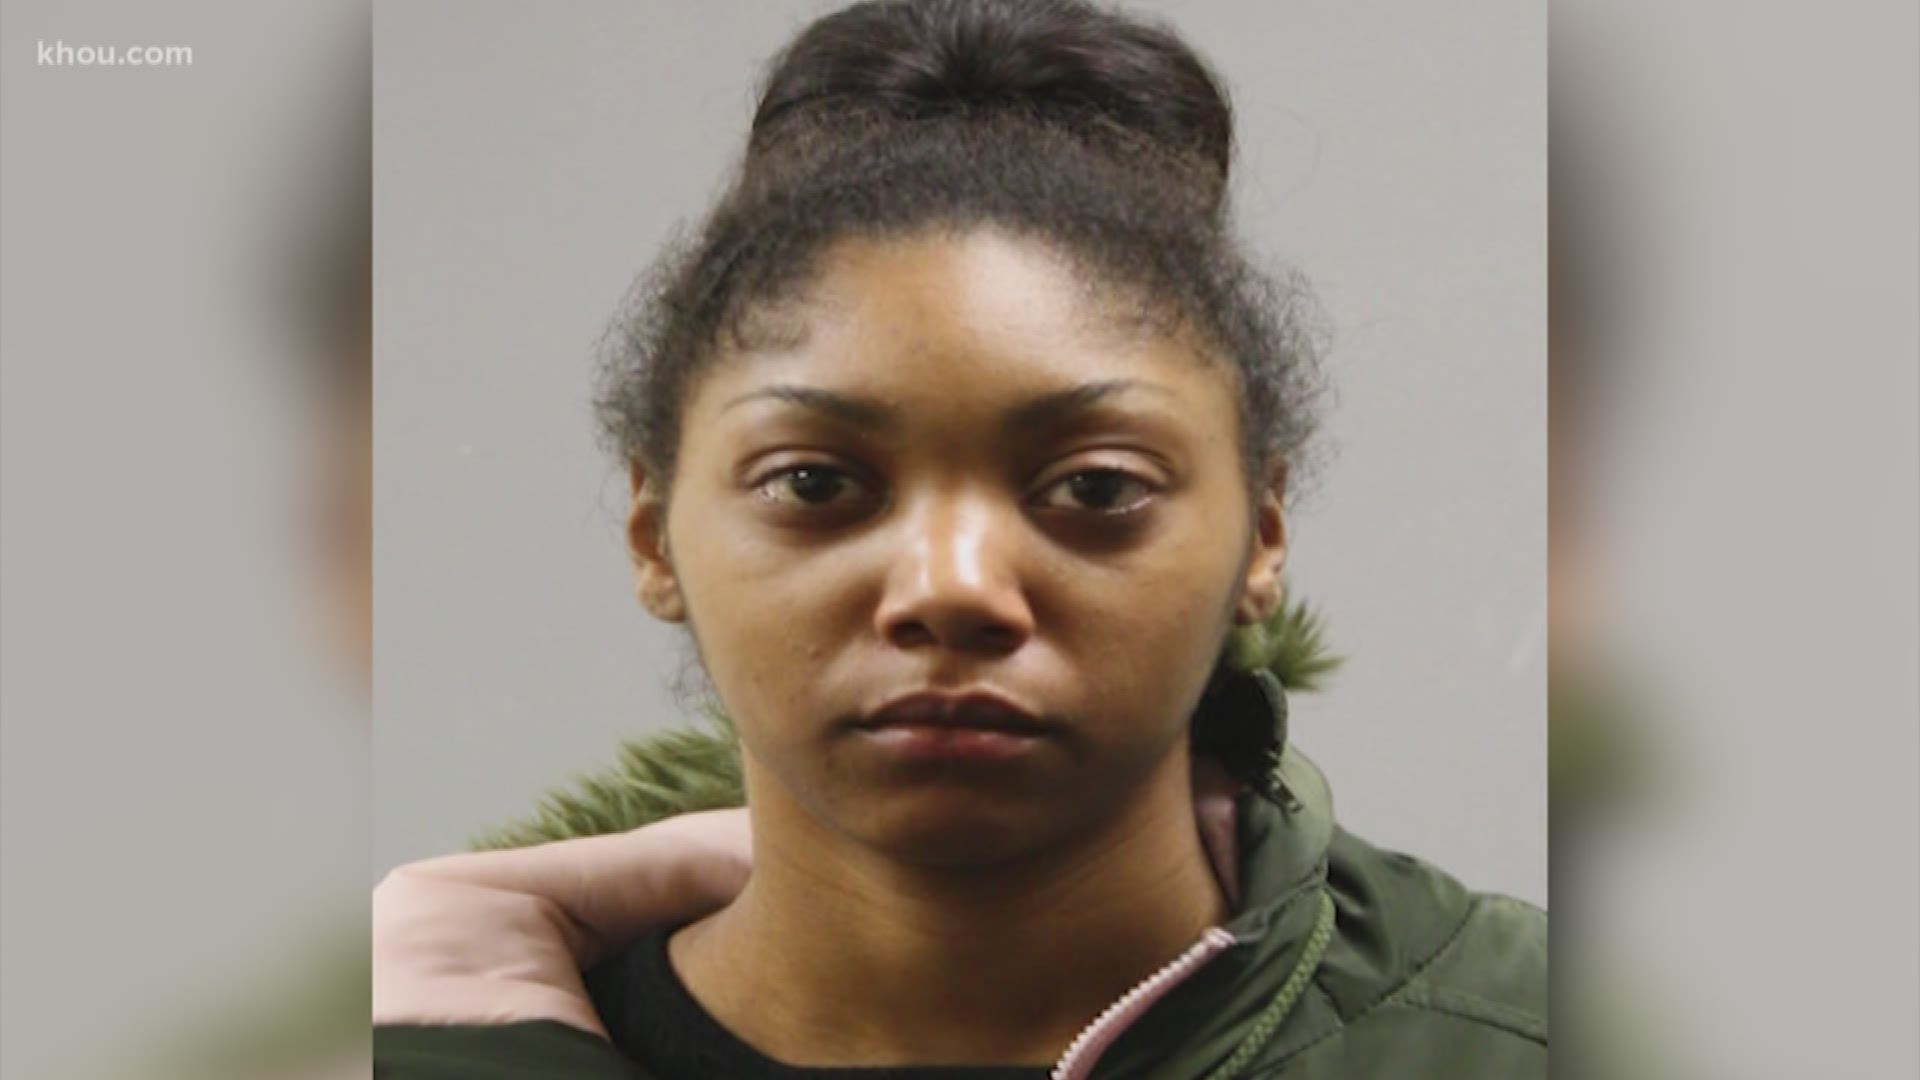 A 19-year-old who was supposed to be babysitting her 3-year-old cousin is now facing felony charges in connection with his death.